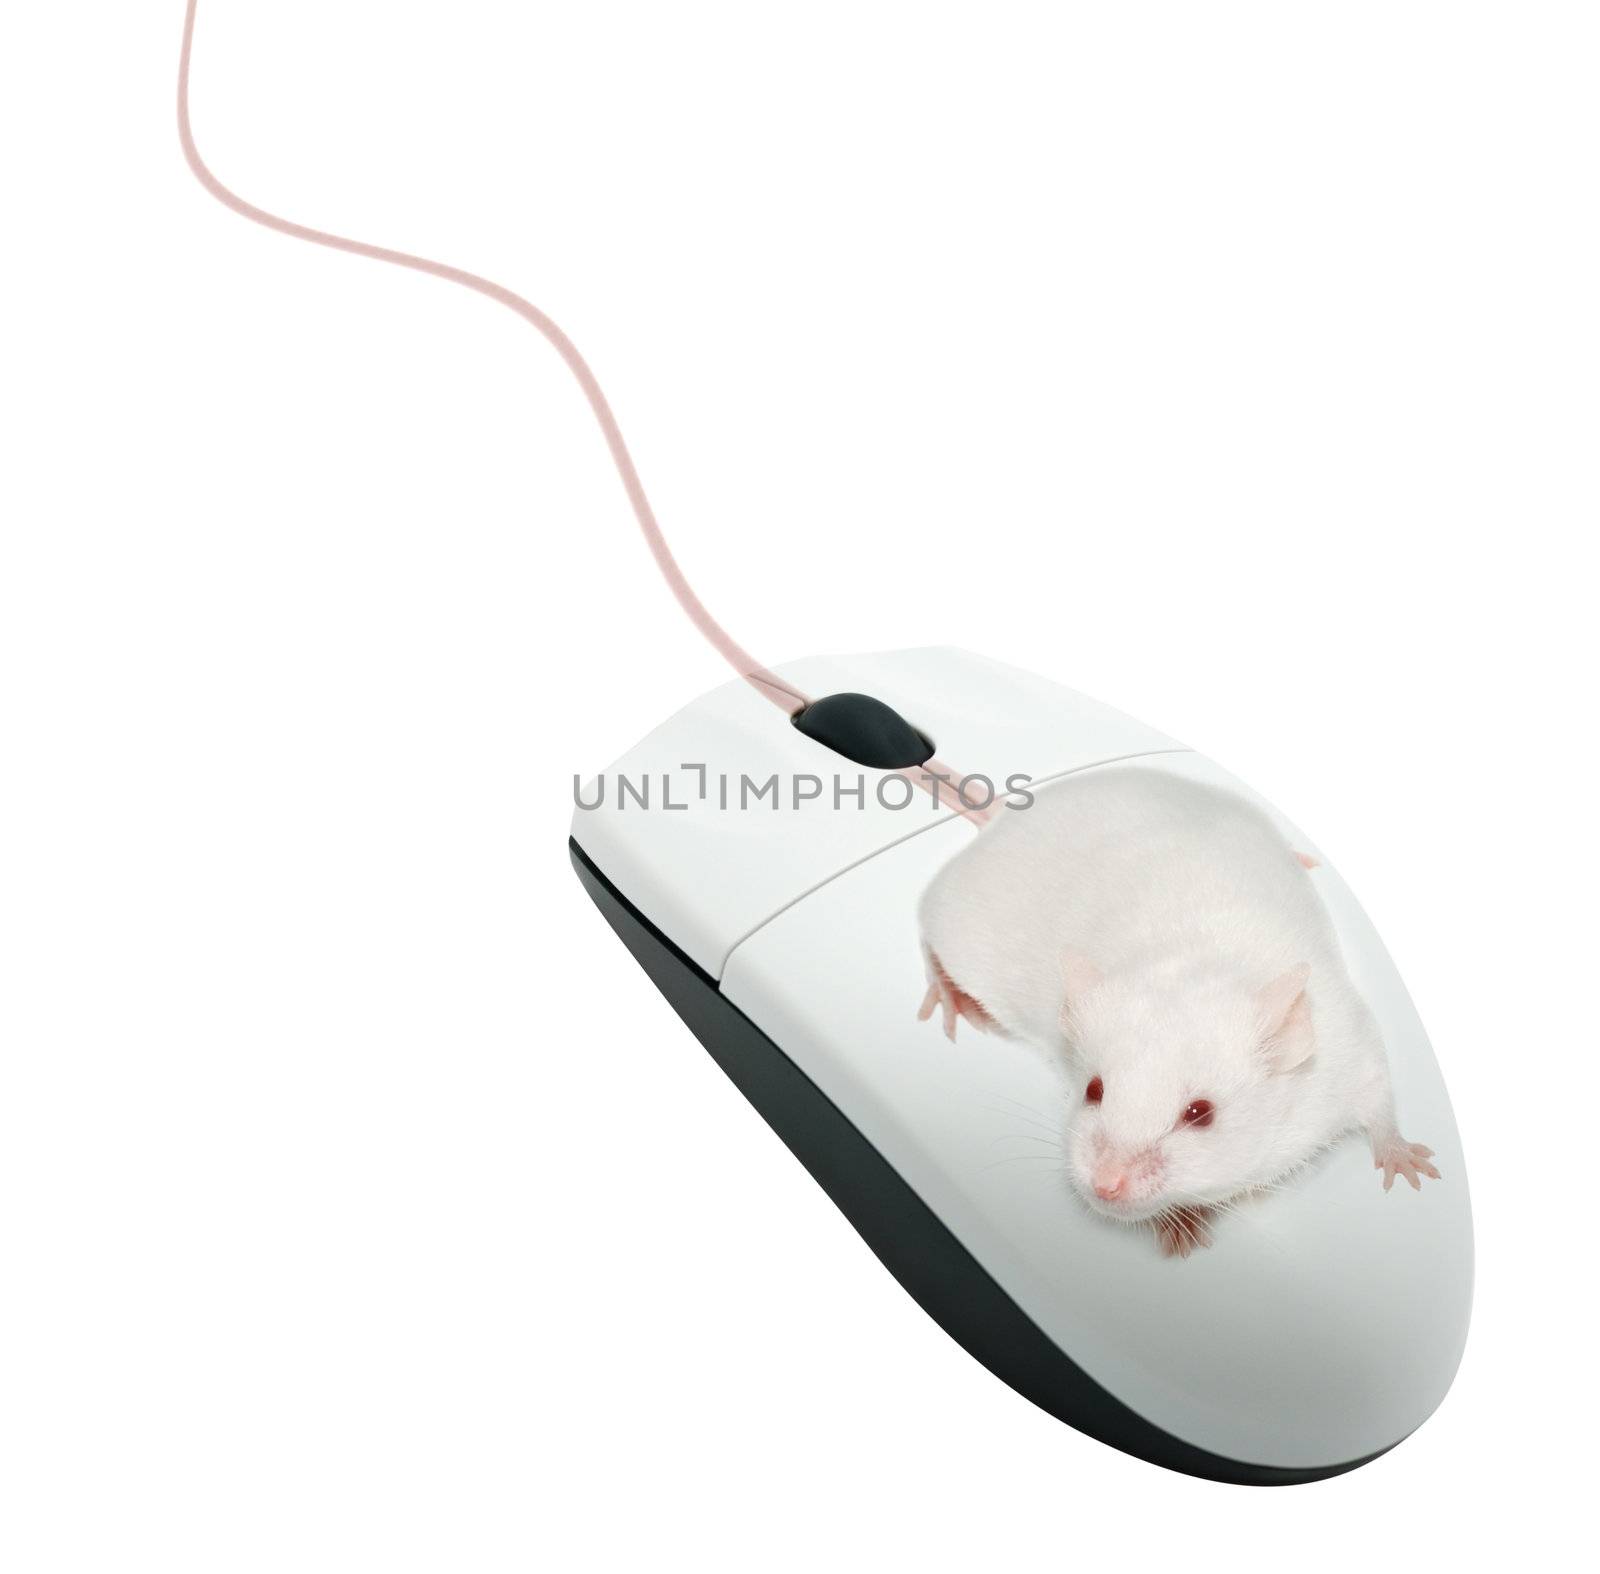 Live mouse on a computer mouse by galdzer